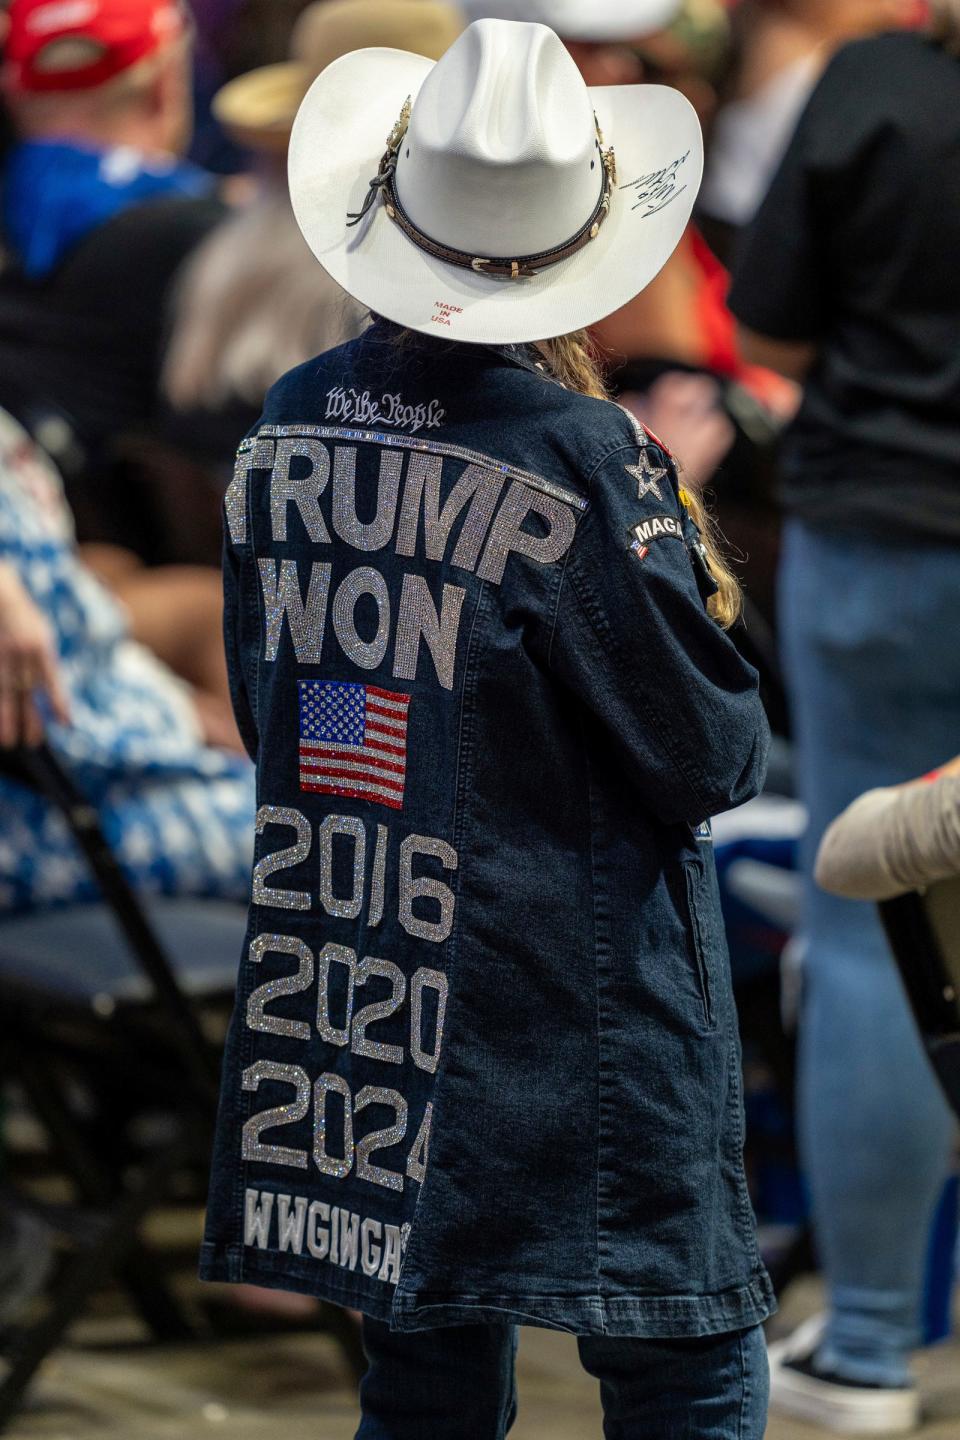 An attendee stands up wearing a bedazzled jean jacket stating Trump won 2016, 2020, and 2024 on the back, during a Trump rally at the Van Andel Arena in Grand Rapids on Saturday, July 20, 2024.